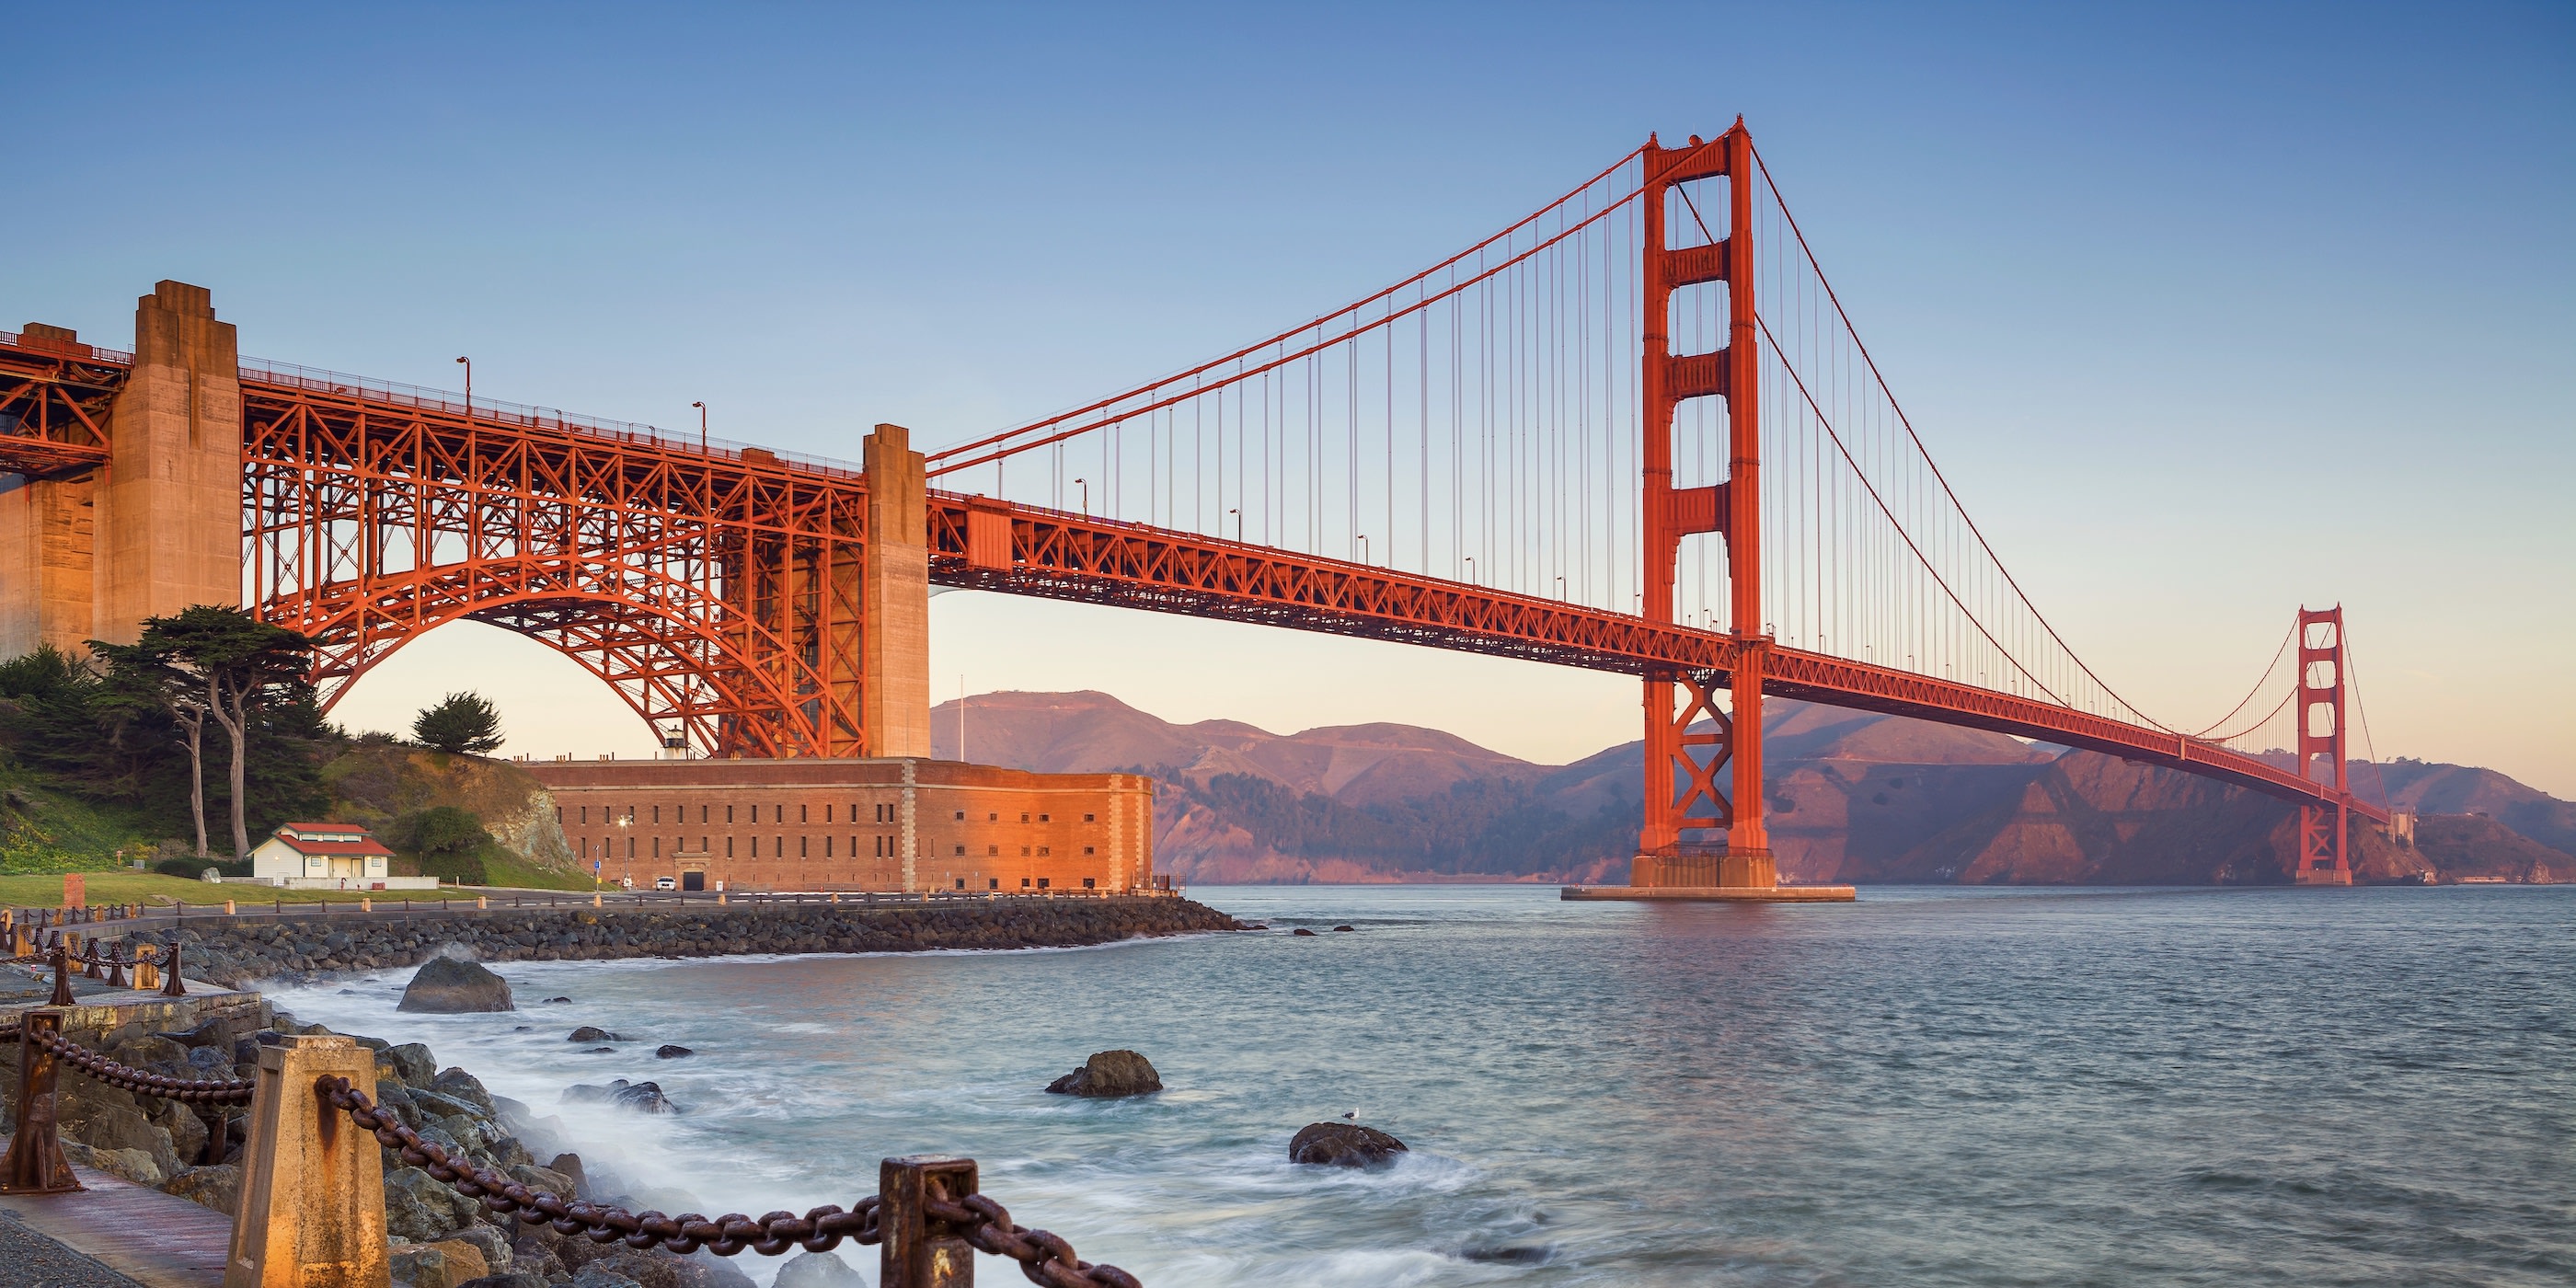 Why You Should Add The Golden Gate Bridge To Your California Bucket List